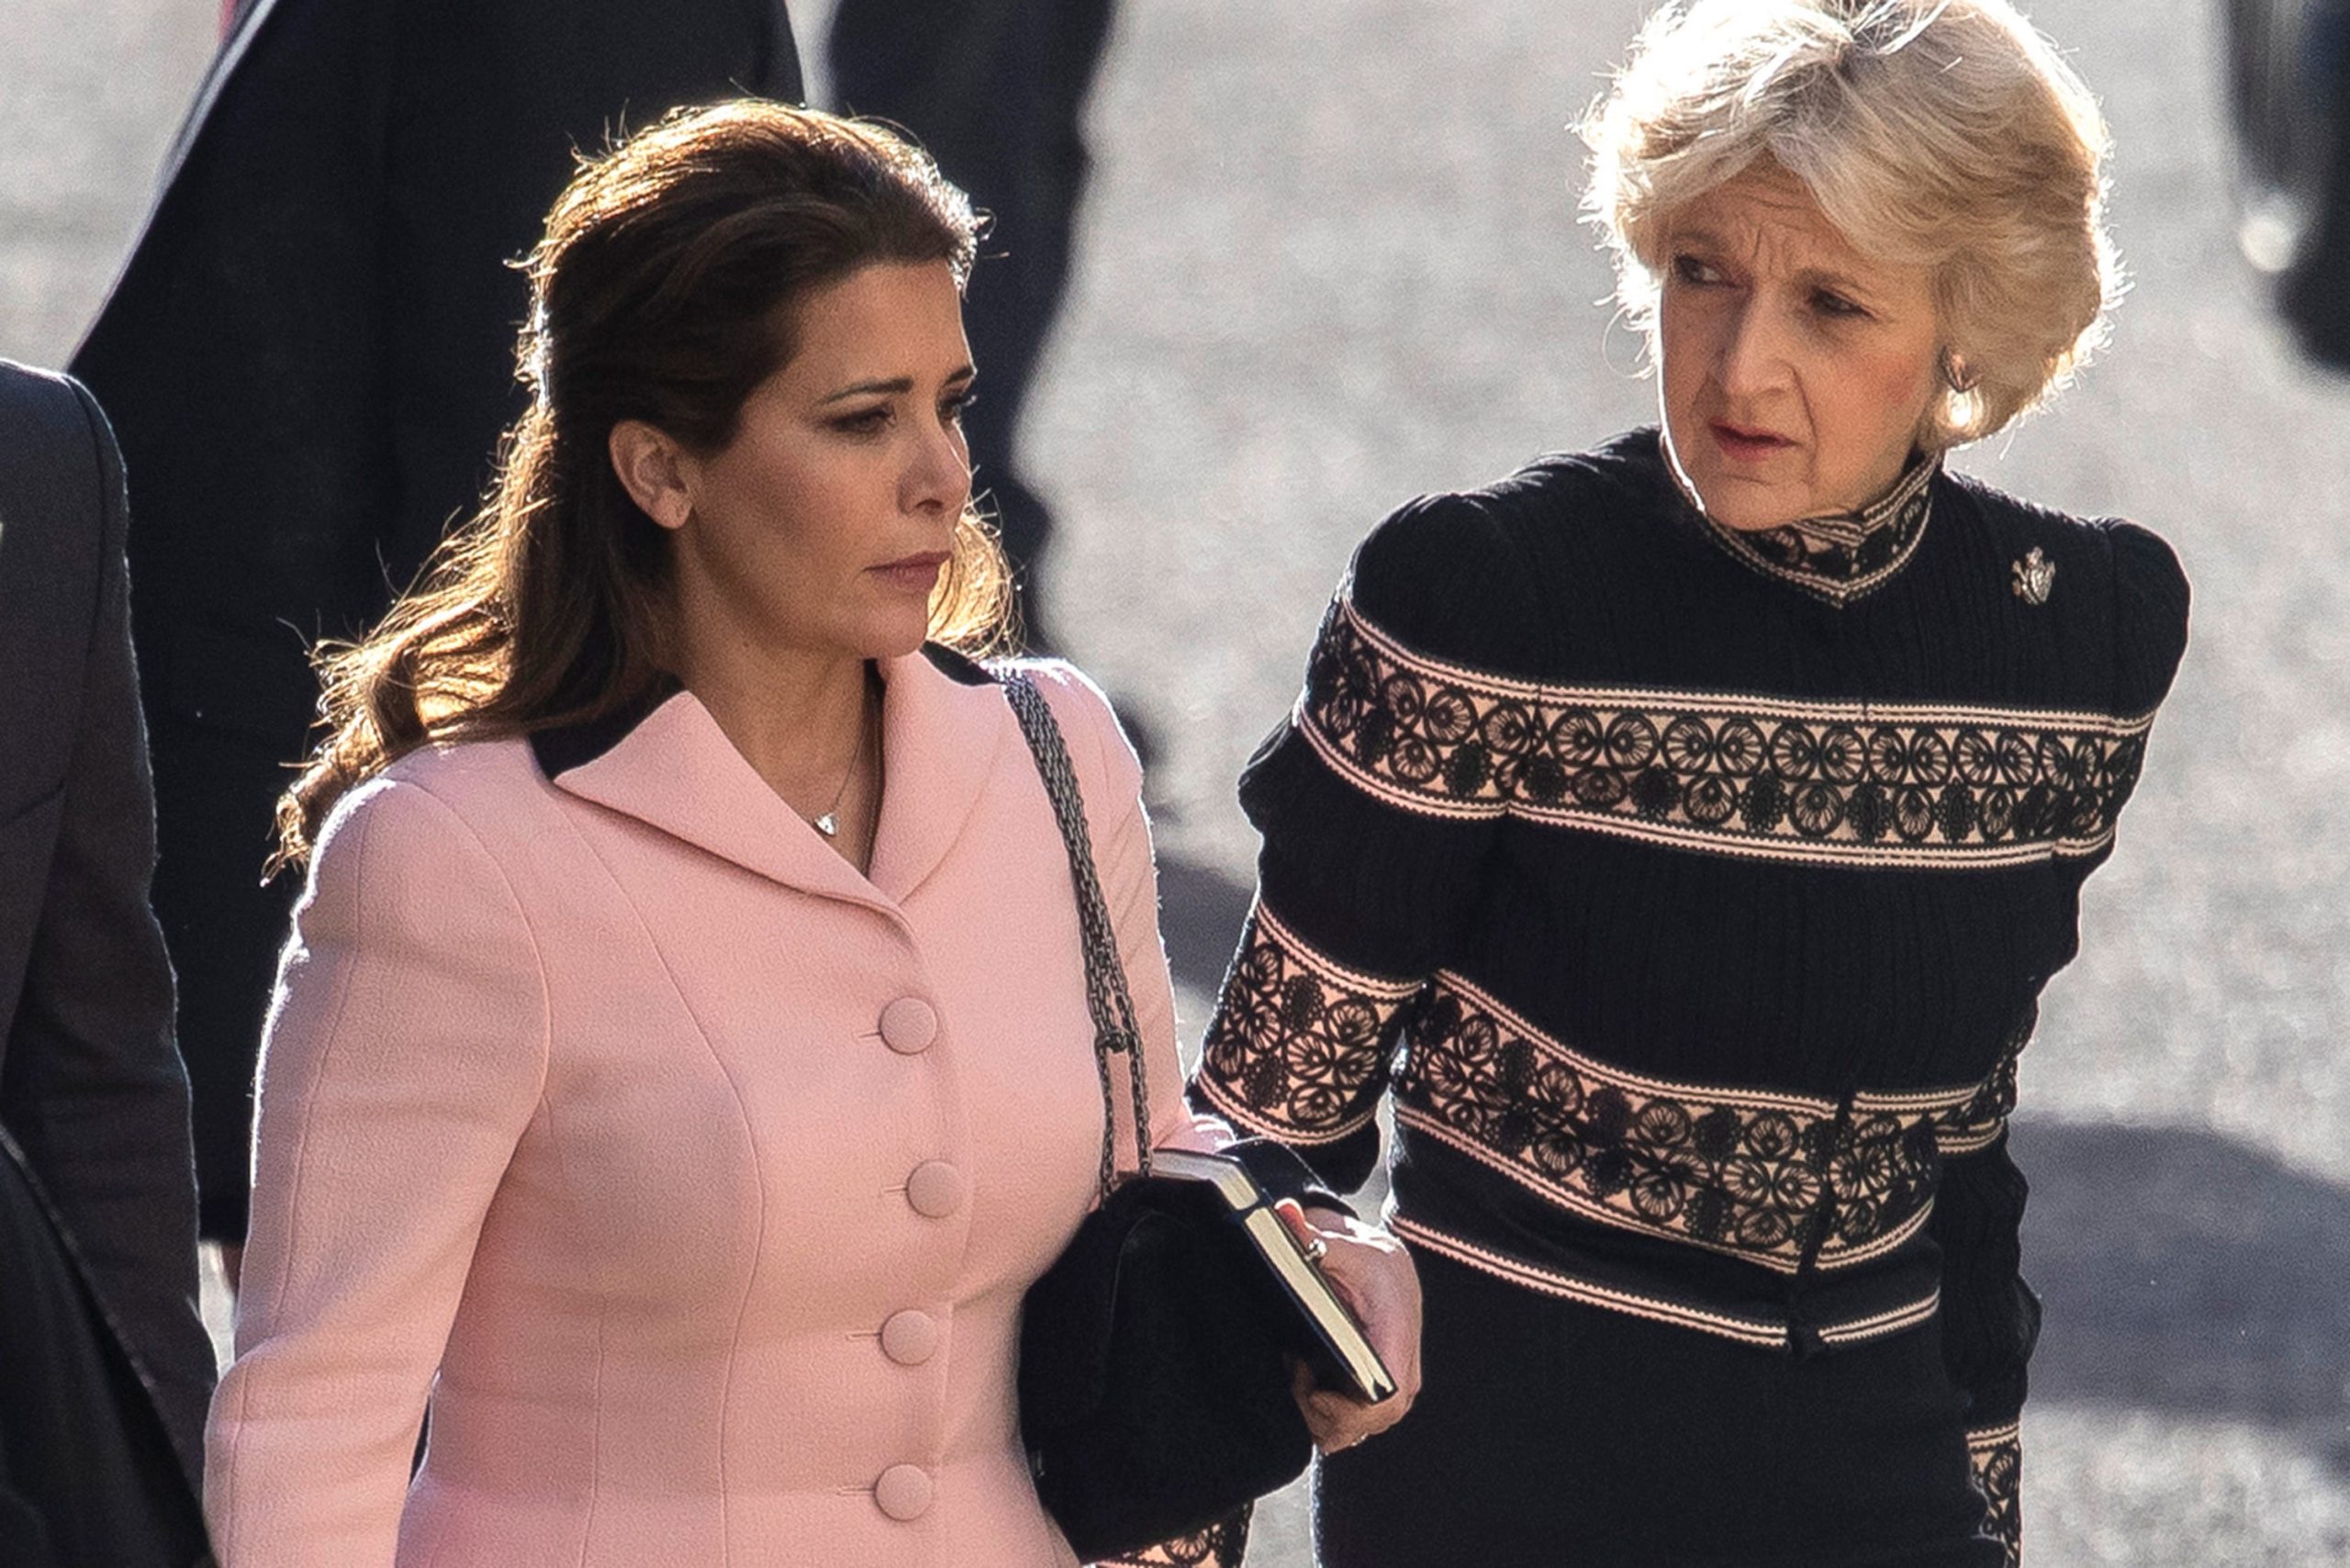 Princess Haya Bint al-Hussein arrives at the High Court with her lawyer Fiona Shackleton on November 13, 2019 in London, England.